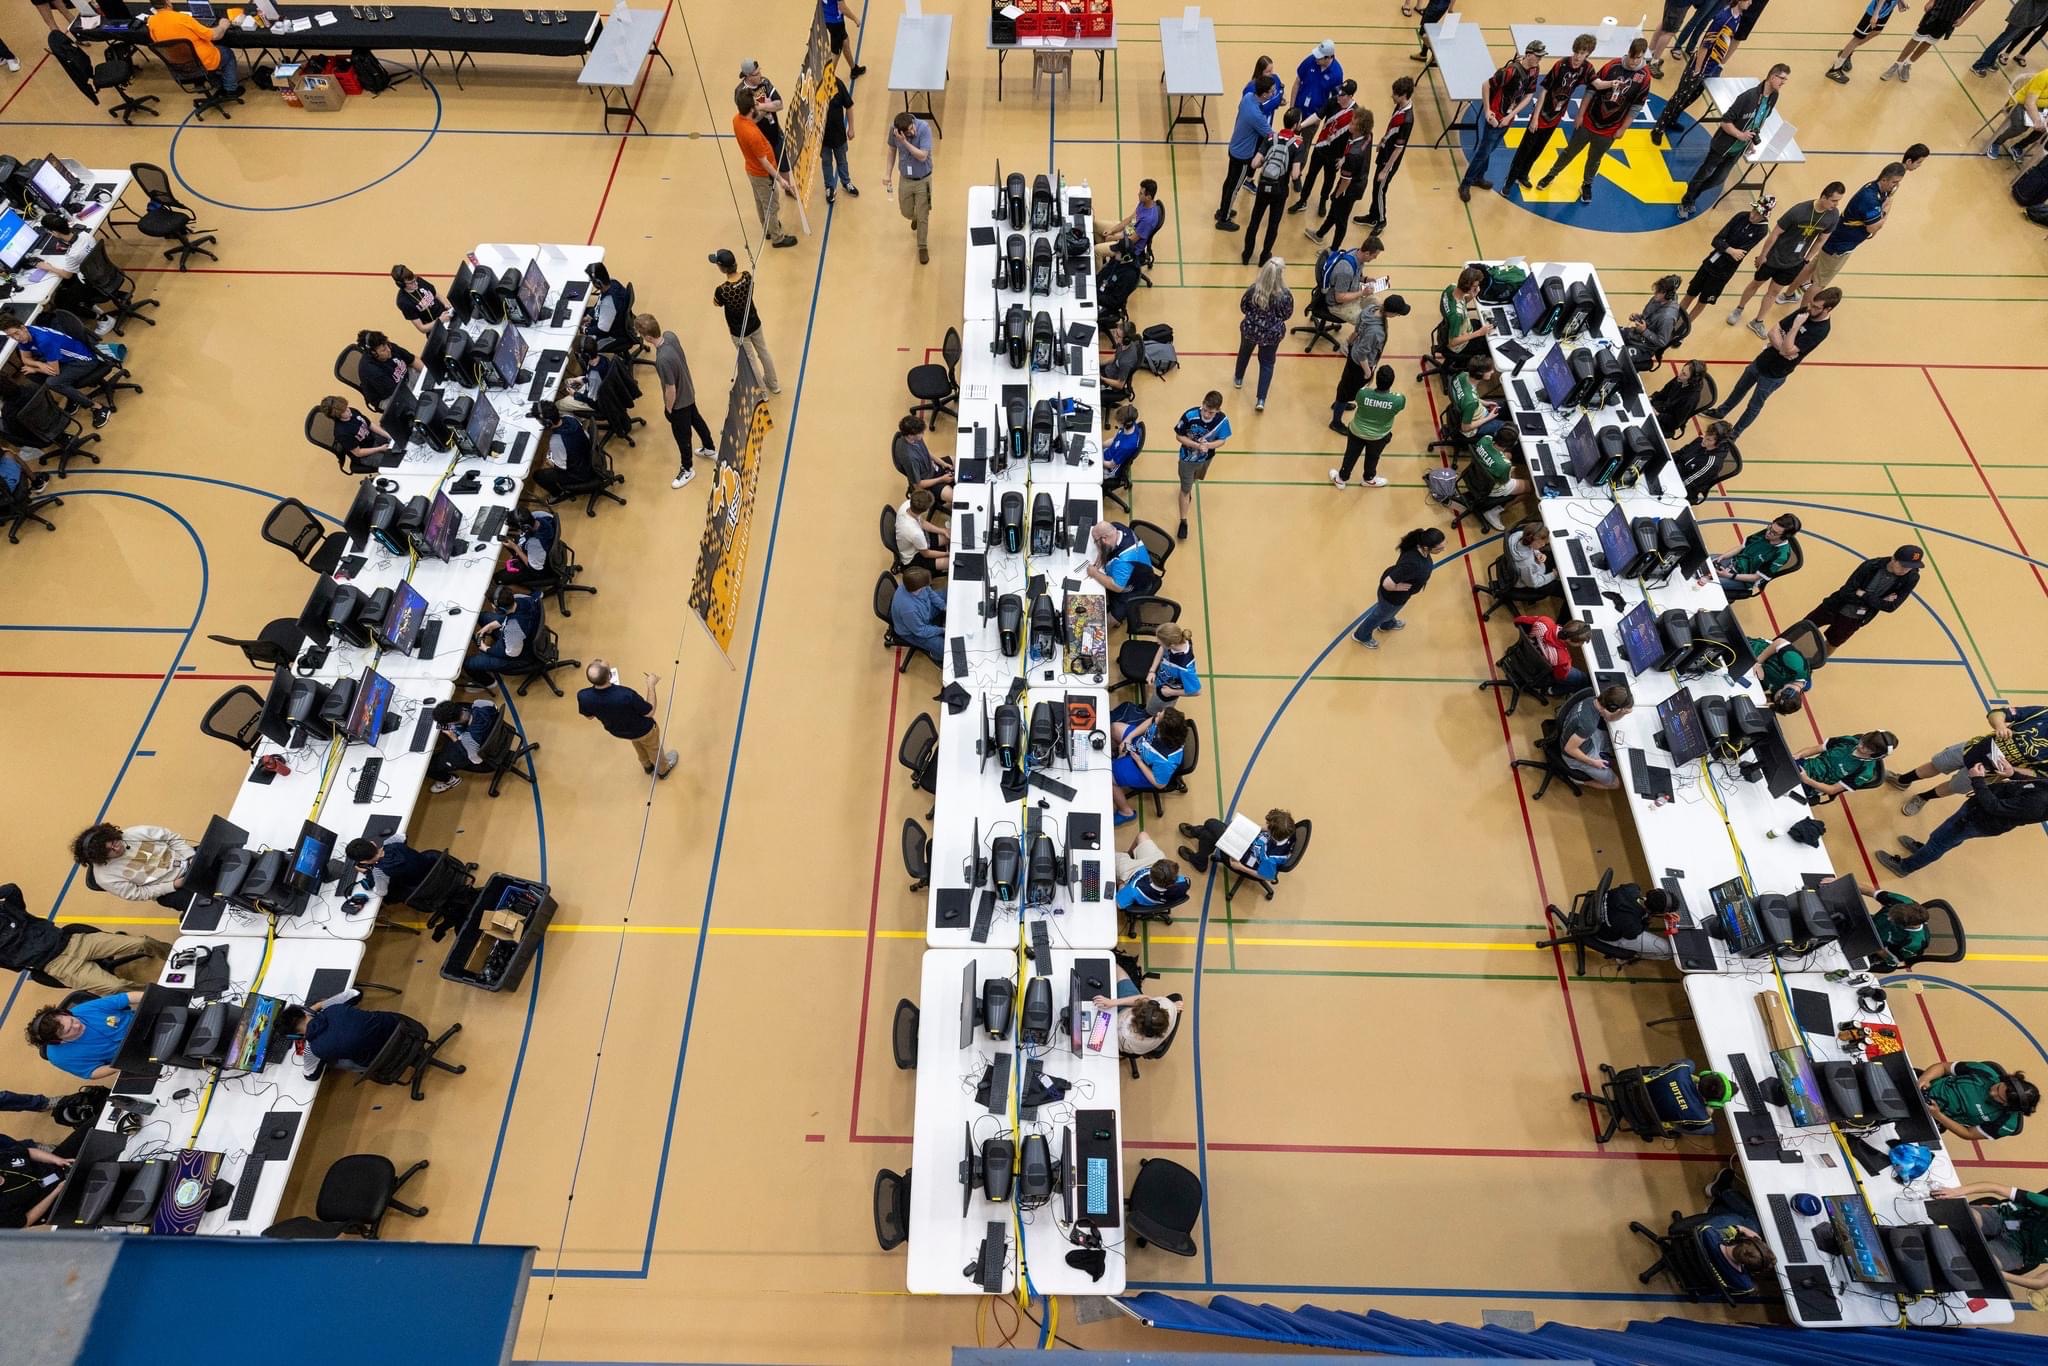 tables with computers in a gym